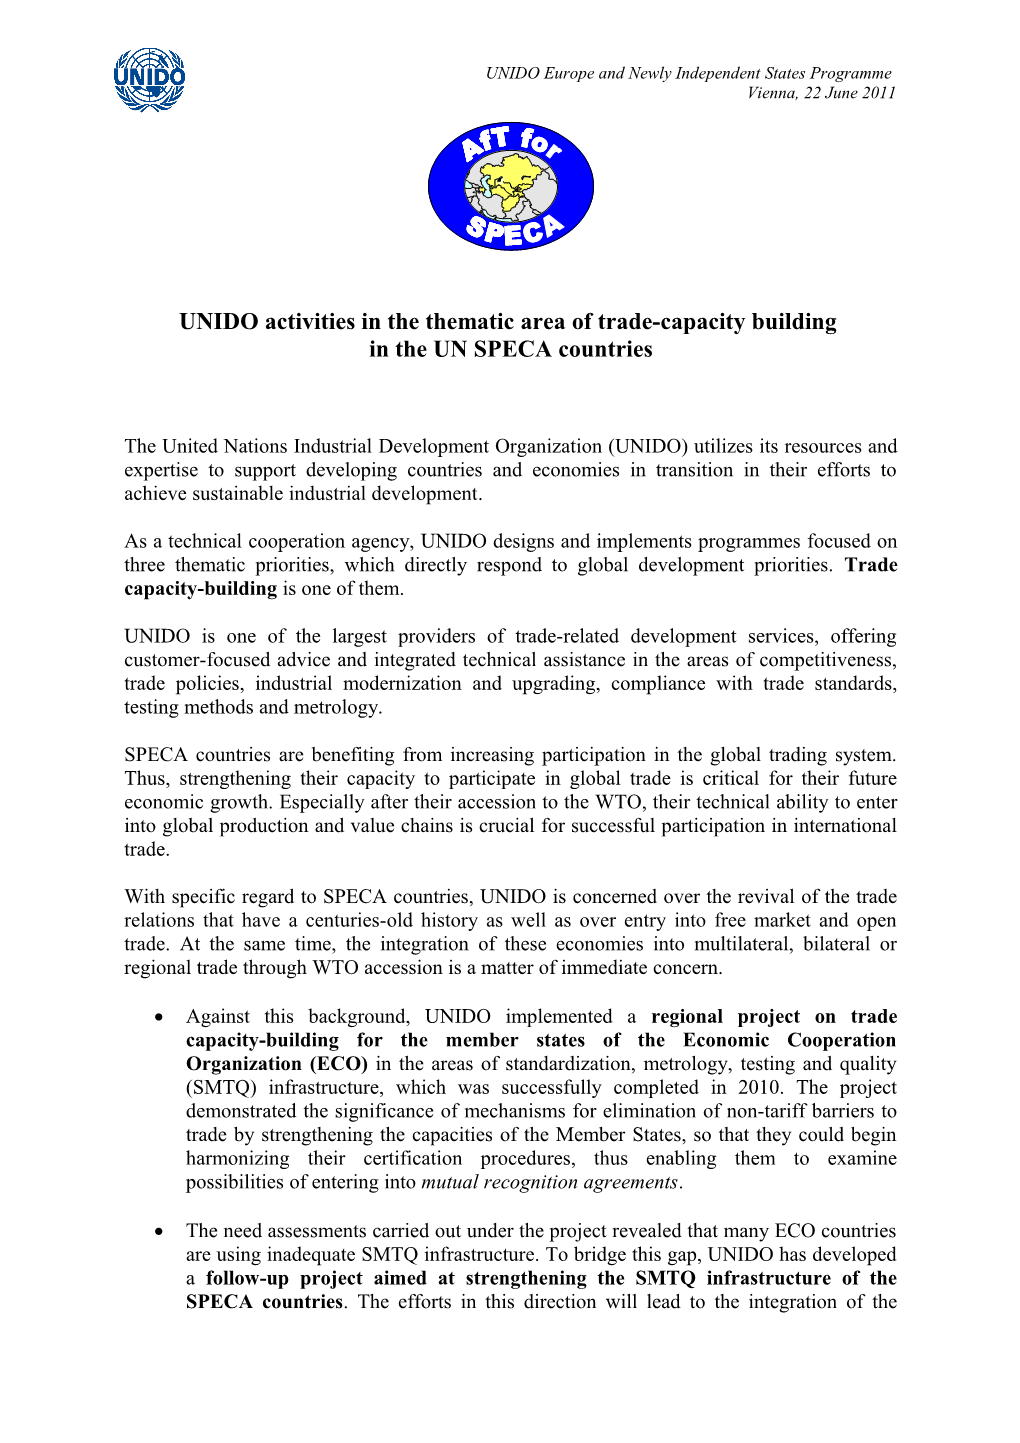 UNIDO Activities in the Thematic Area of Trade-Capacity Building